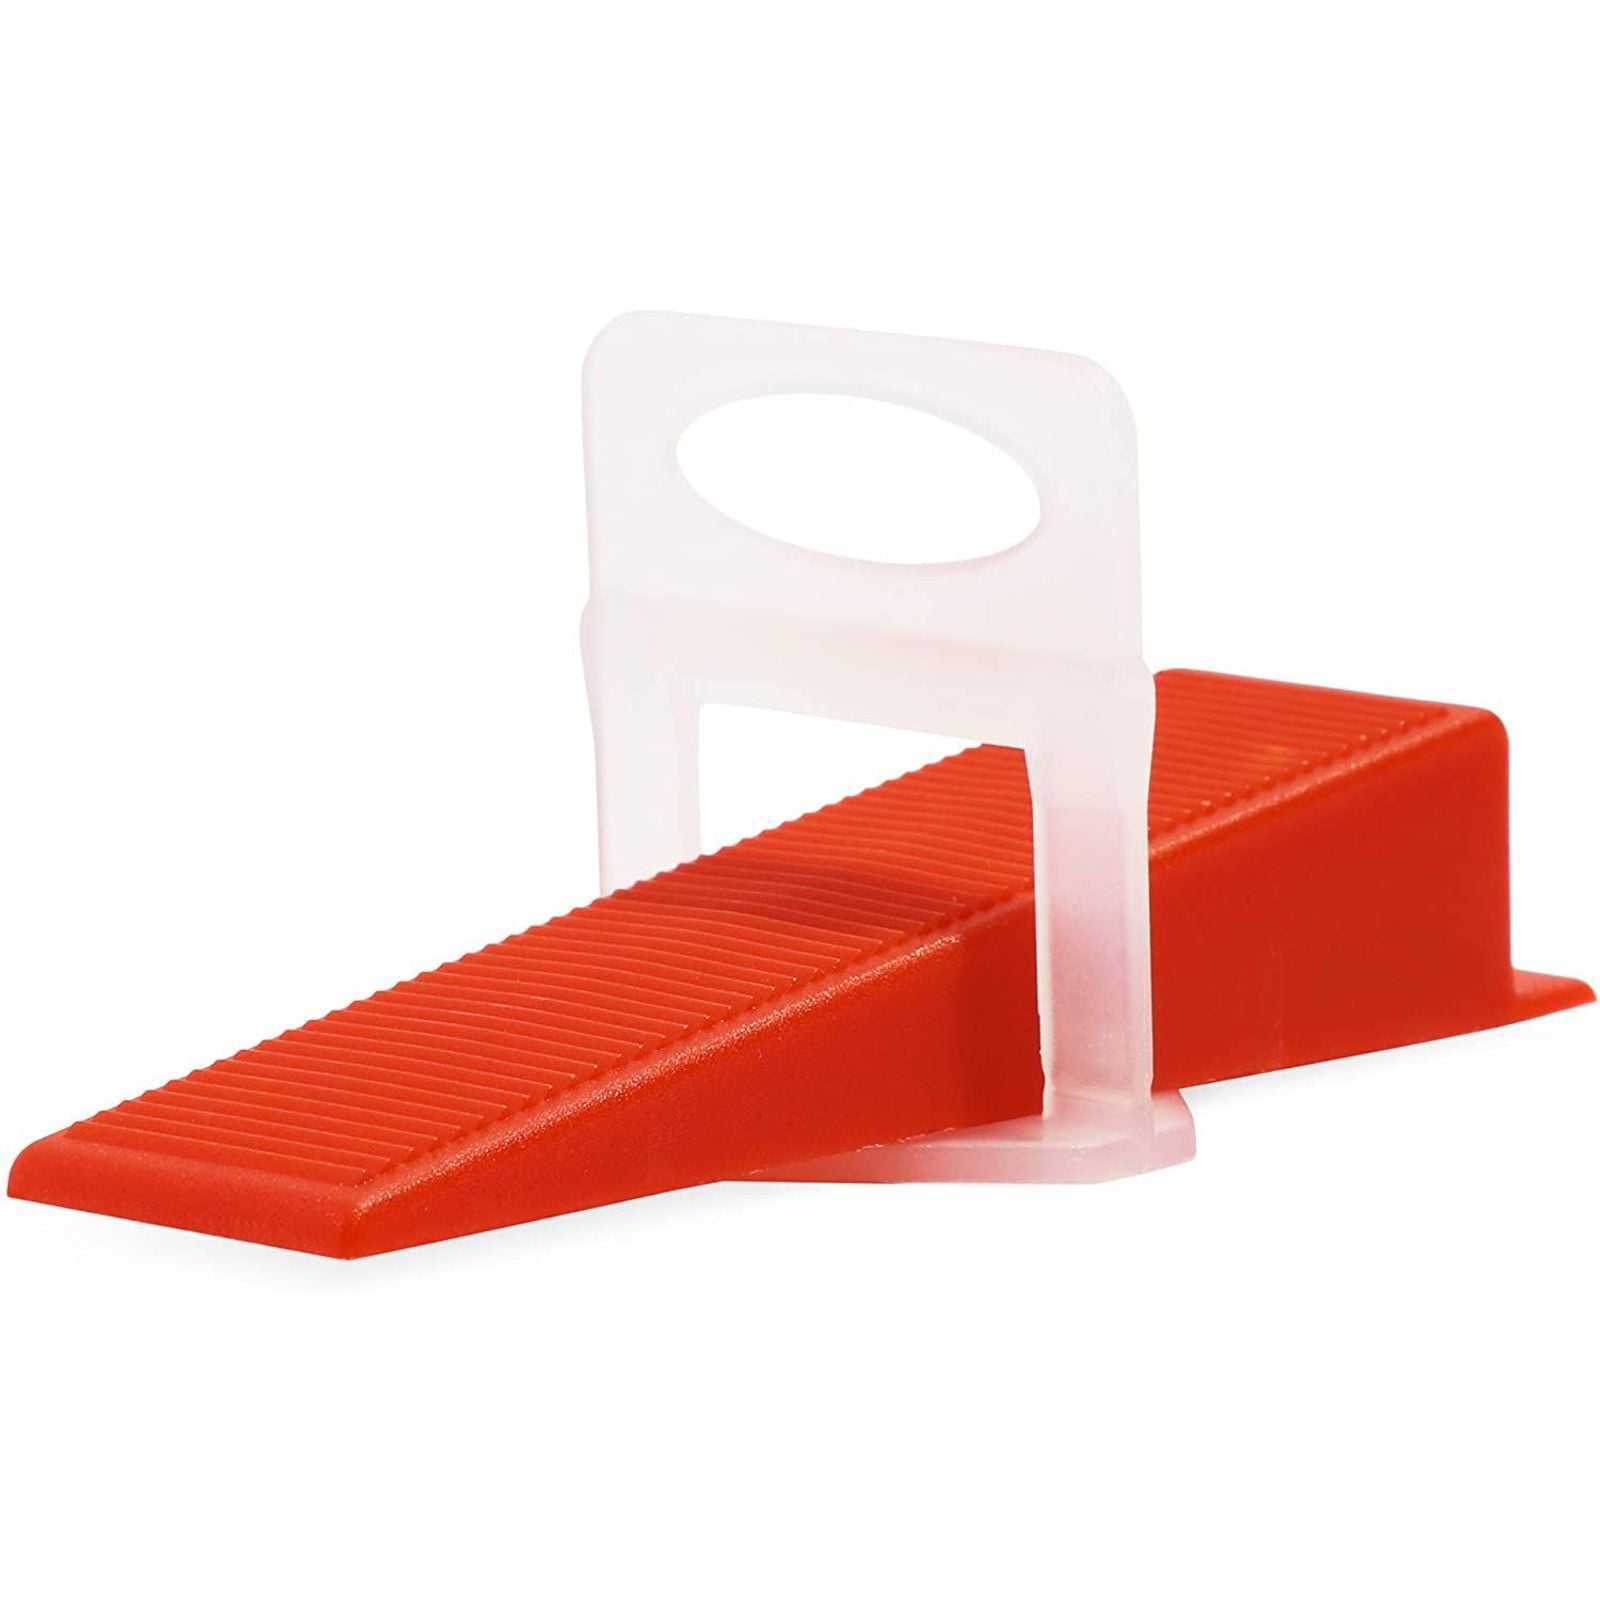 Tile Leveling System, Includes Spacers and Wedges (500 Pack)